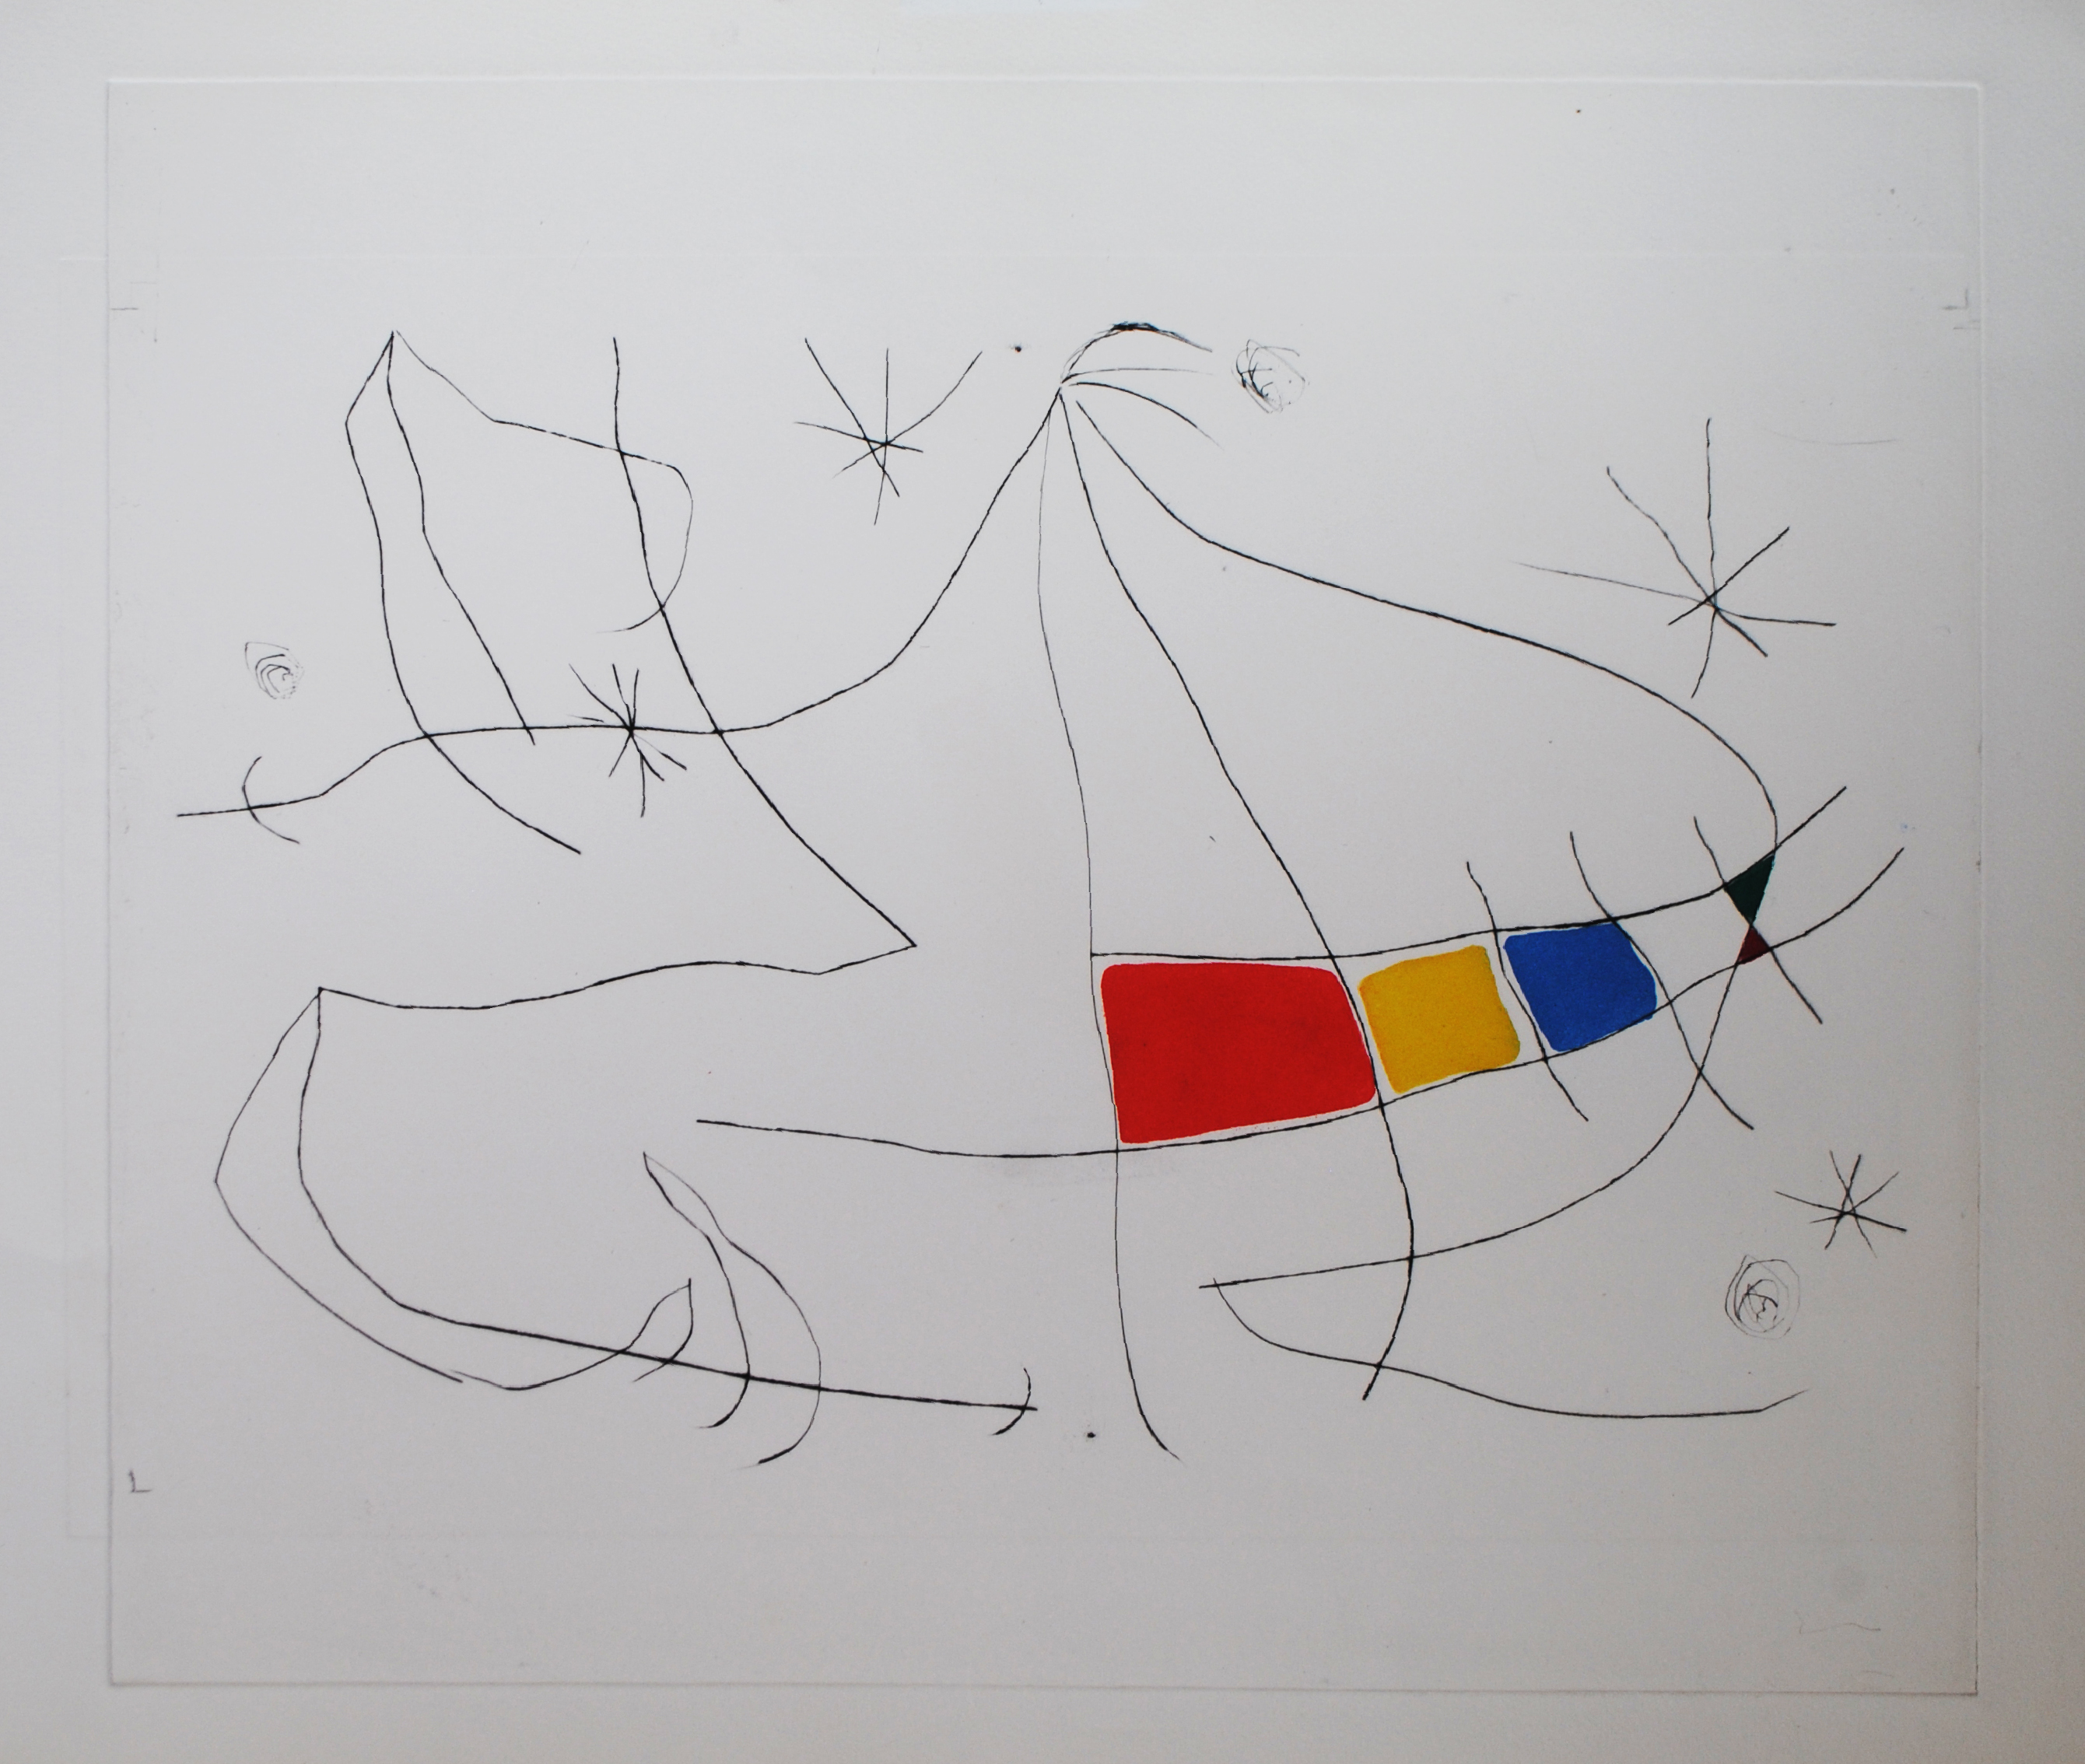 Miro, L'Issue Derobe, drypoint with aquatint, D691